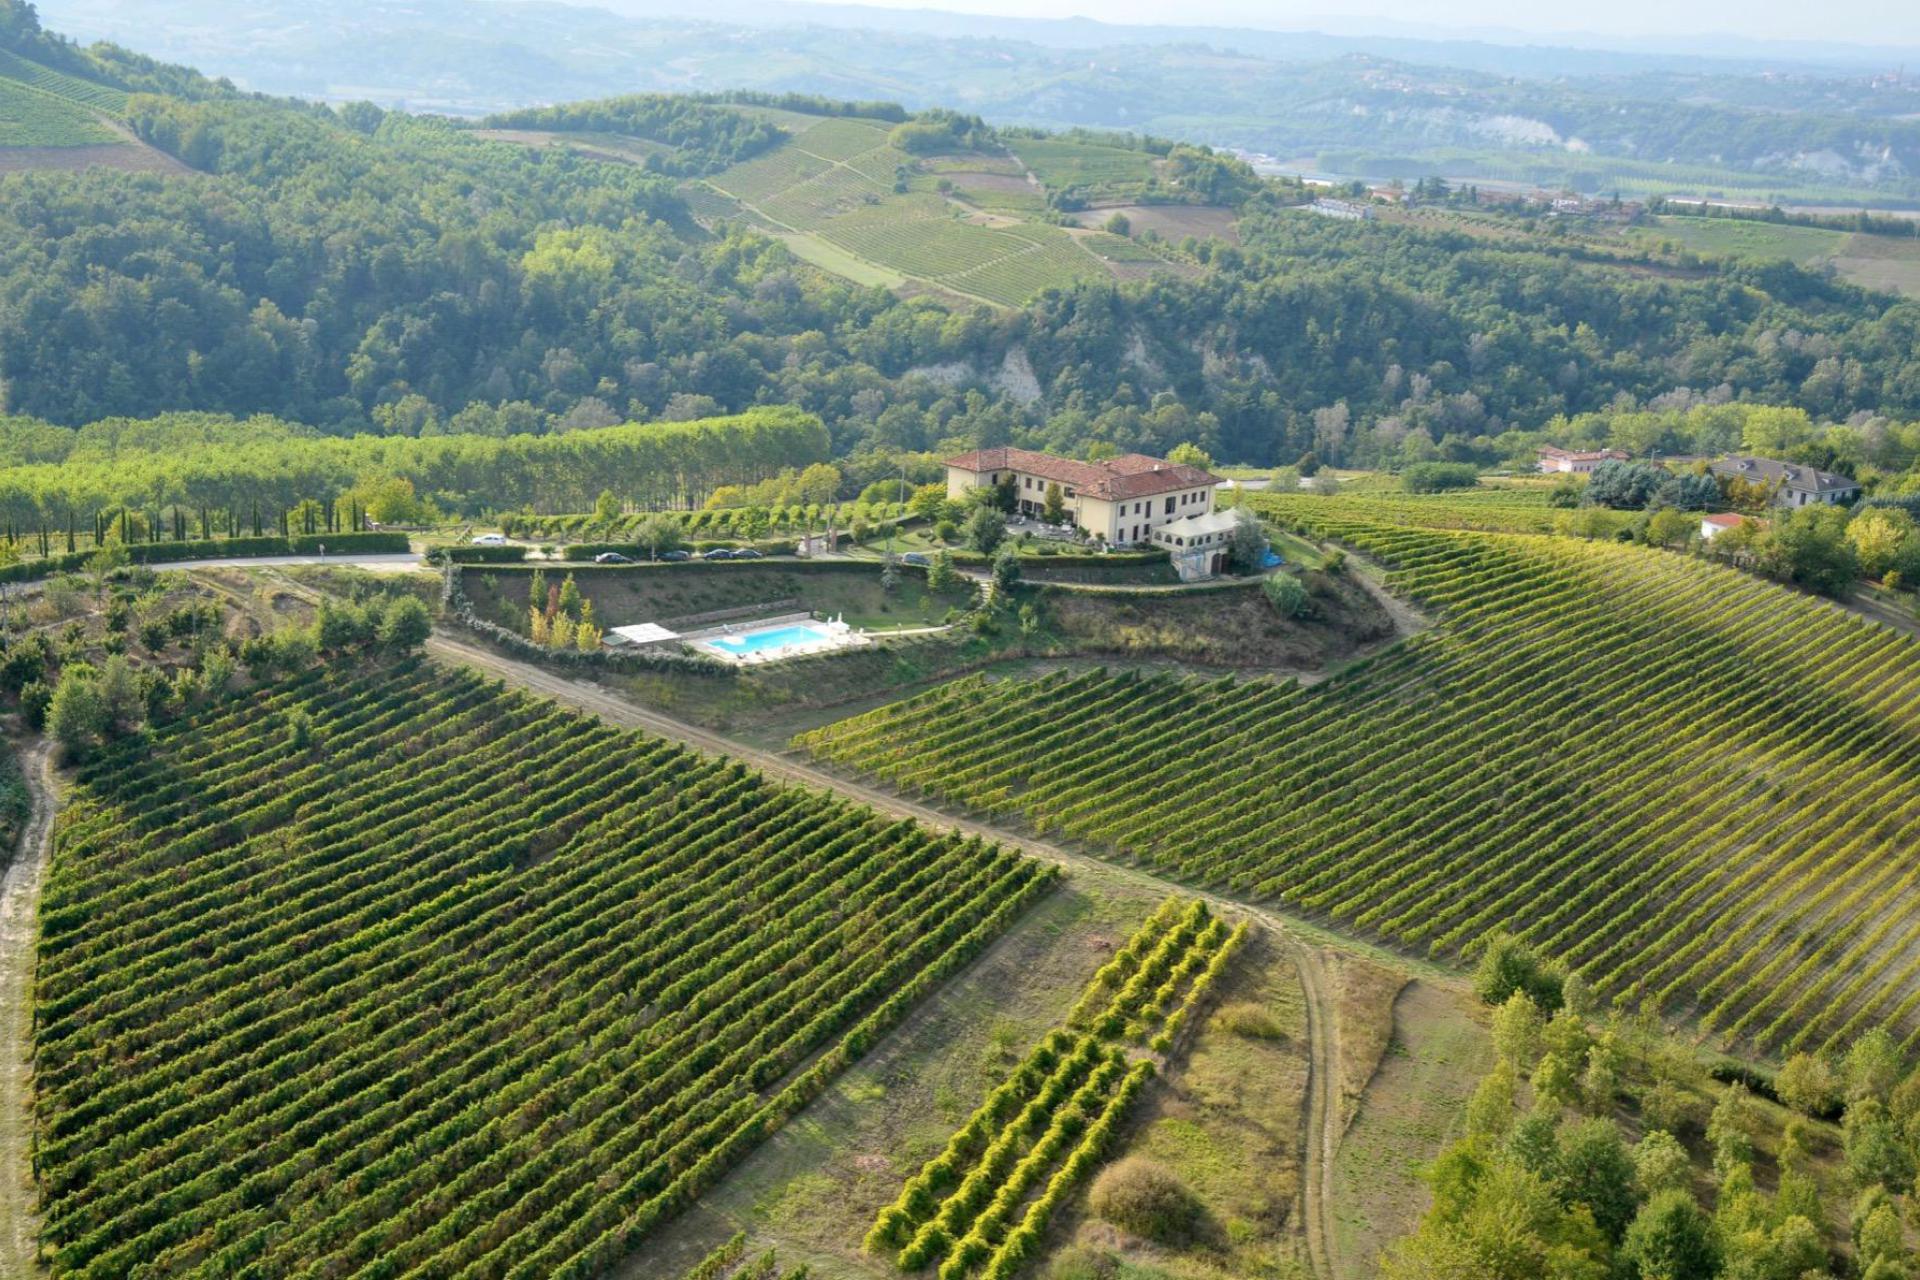 Agriturismo Piemont for lovers of great wines